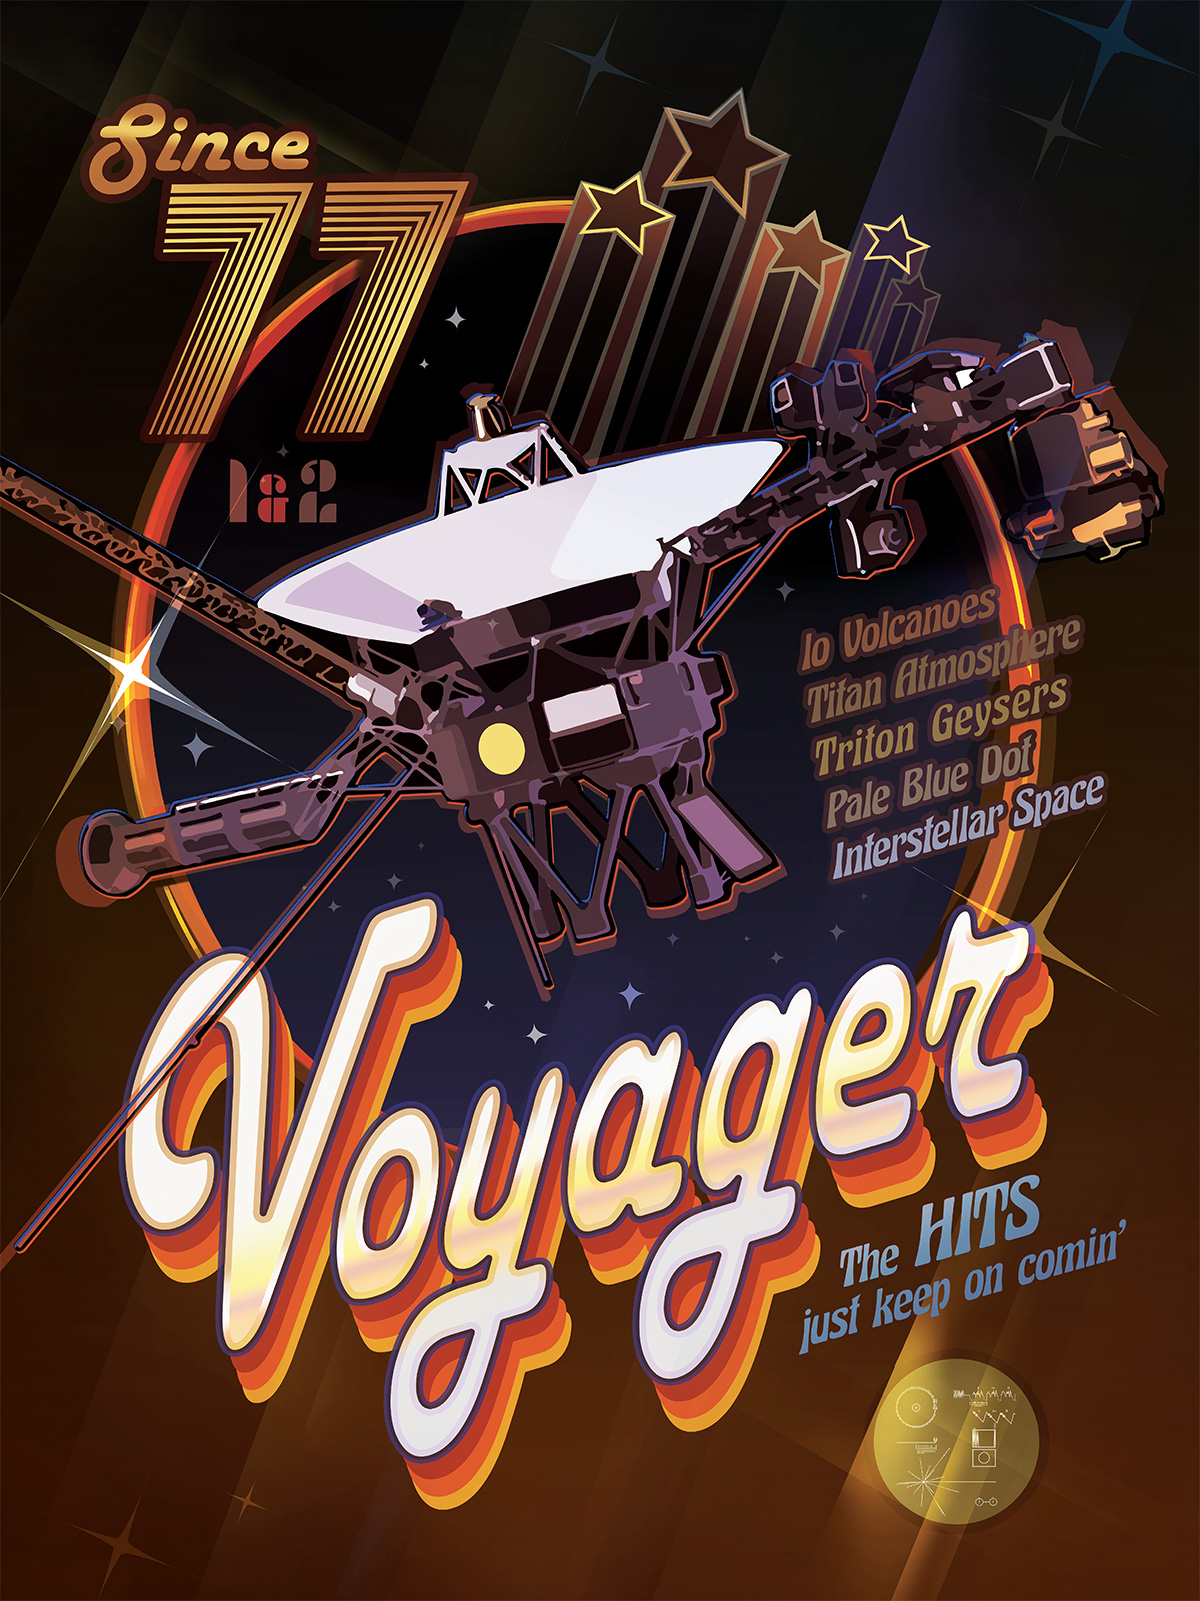 nasa's voyager 1 glitch has scientists sad yet hopeful: 'voyager 2 is still going strong'